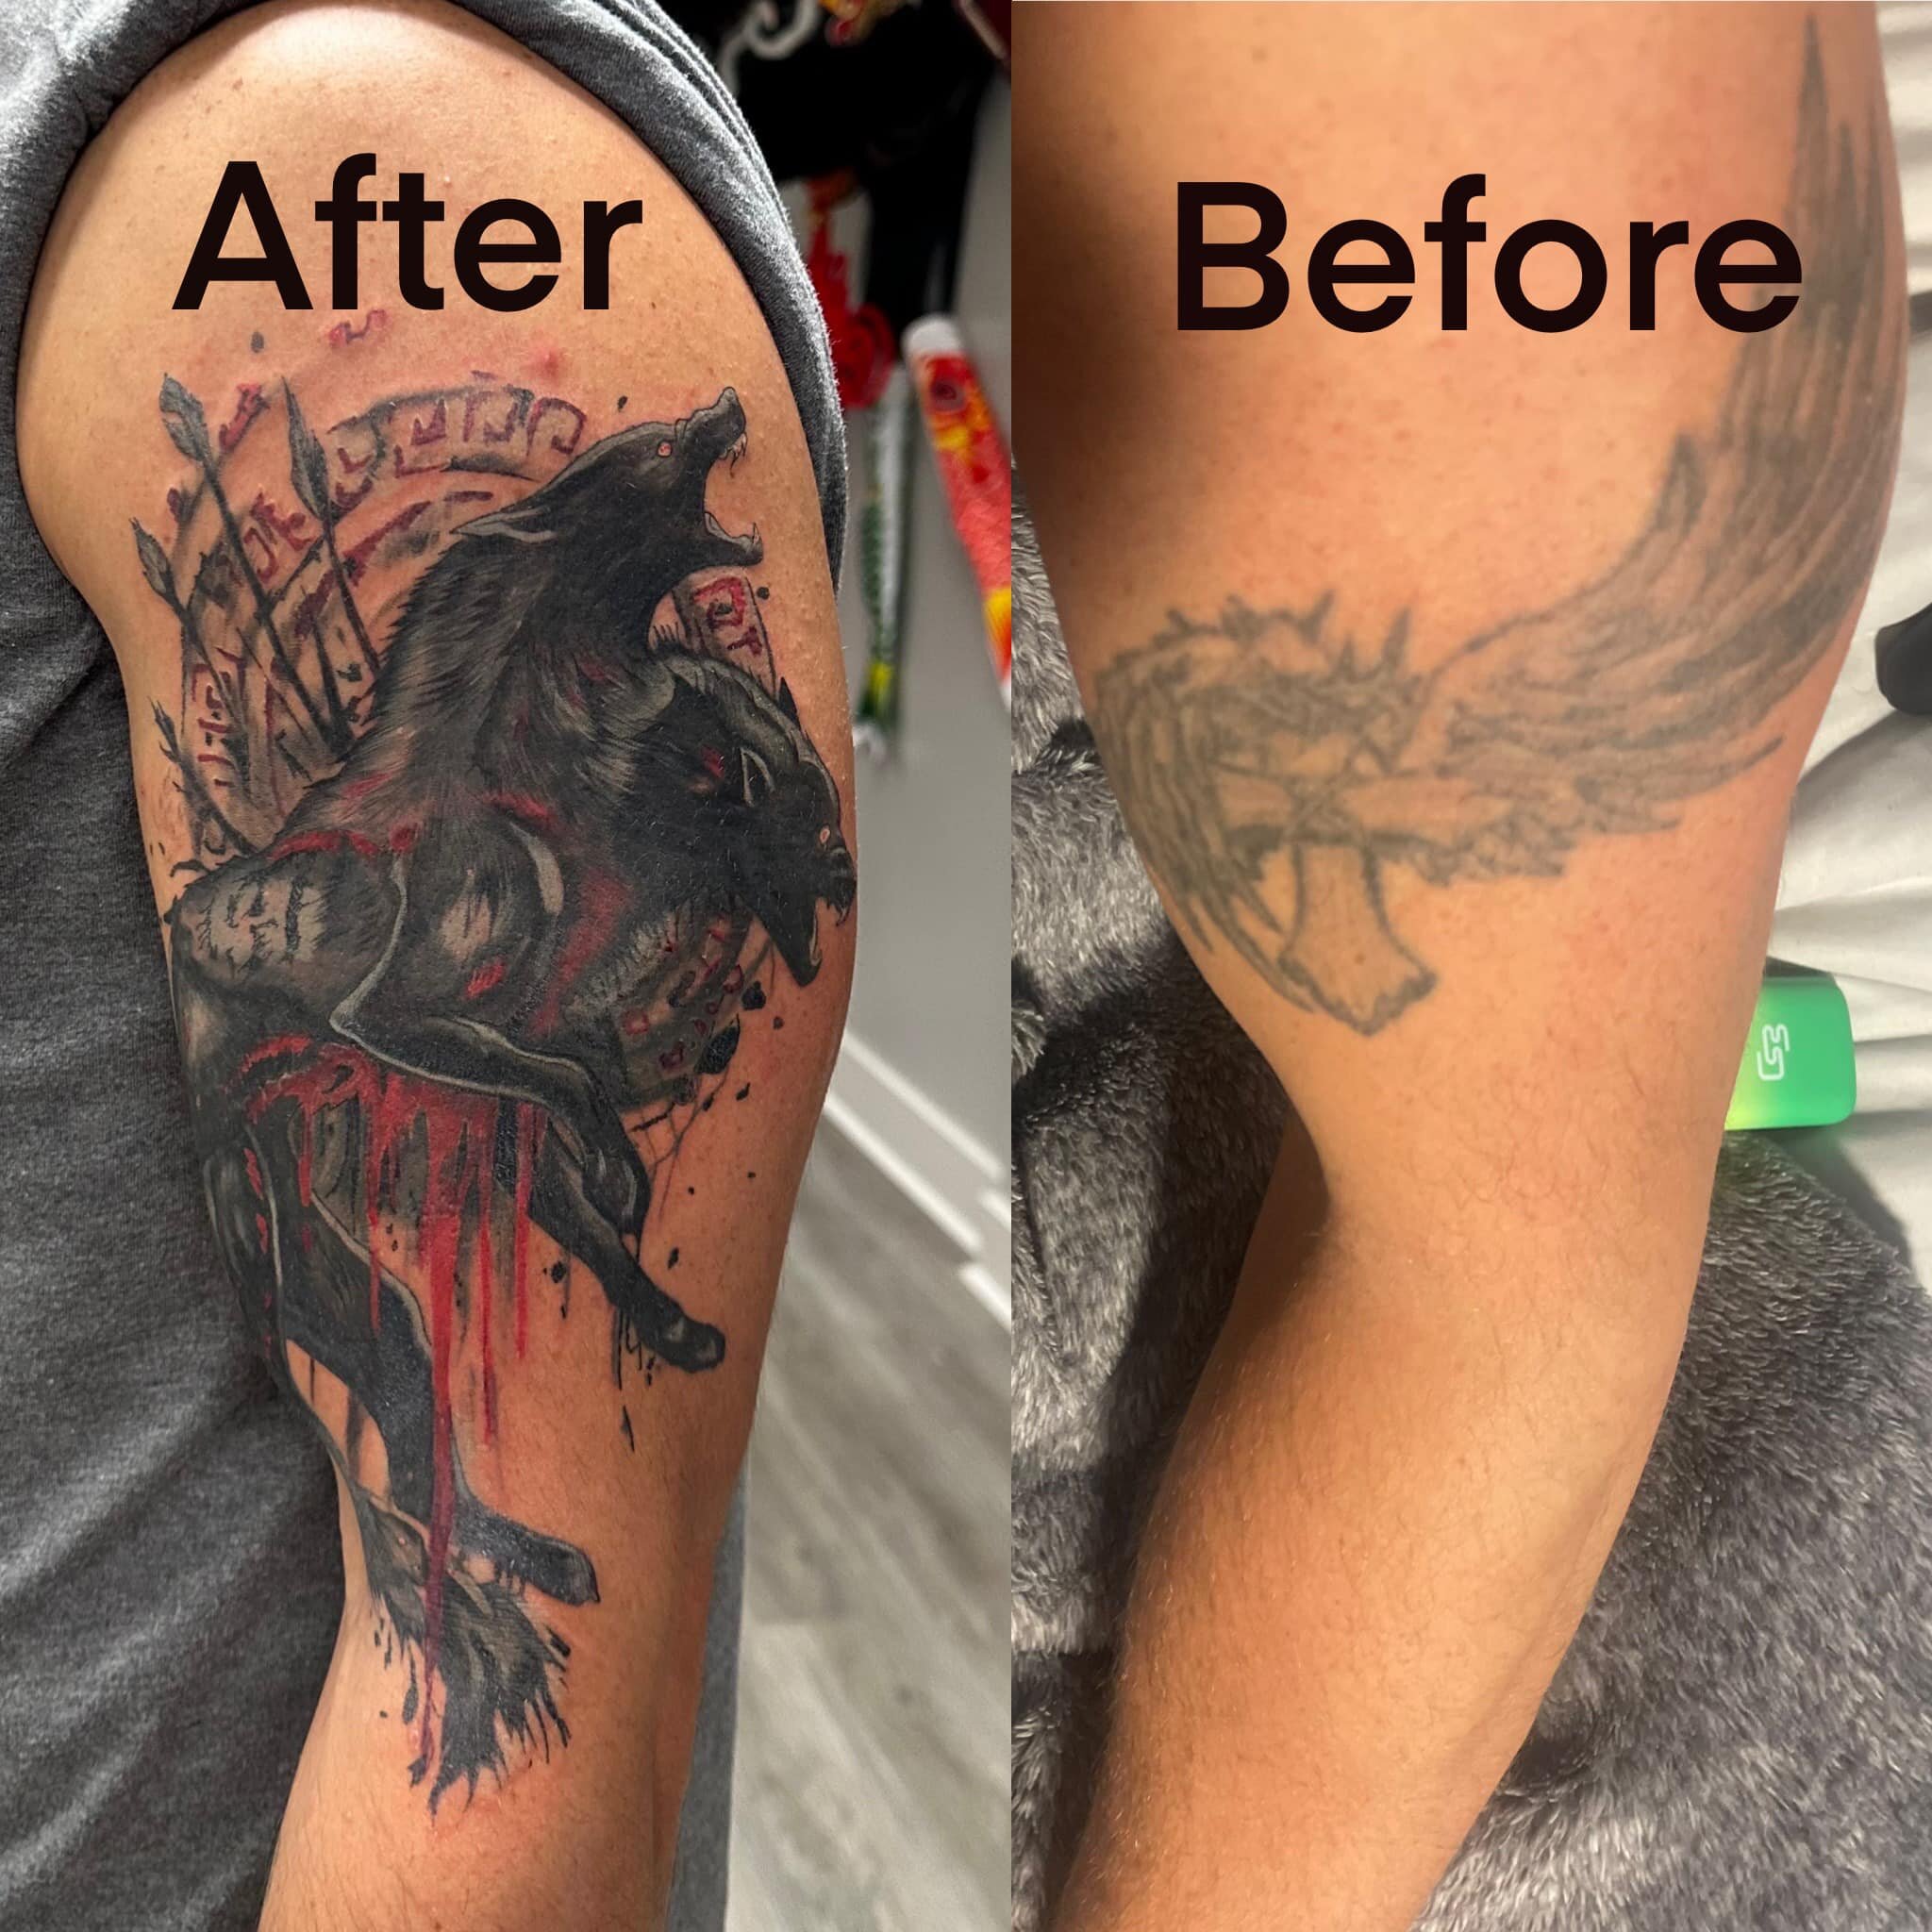 Cover up tattoo done in 8 hours.

Thanks for supporting 🙏